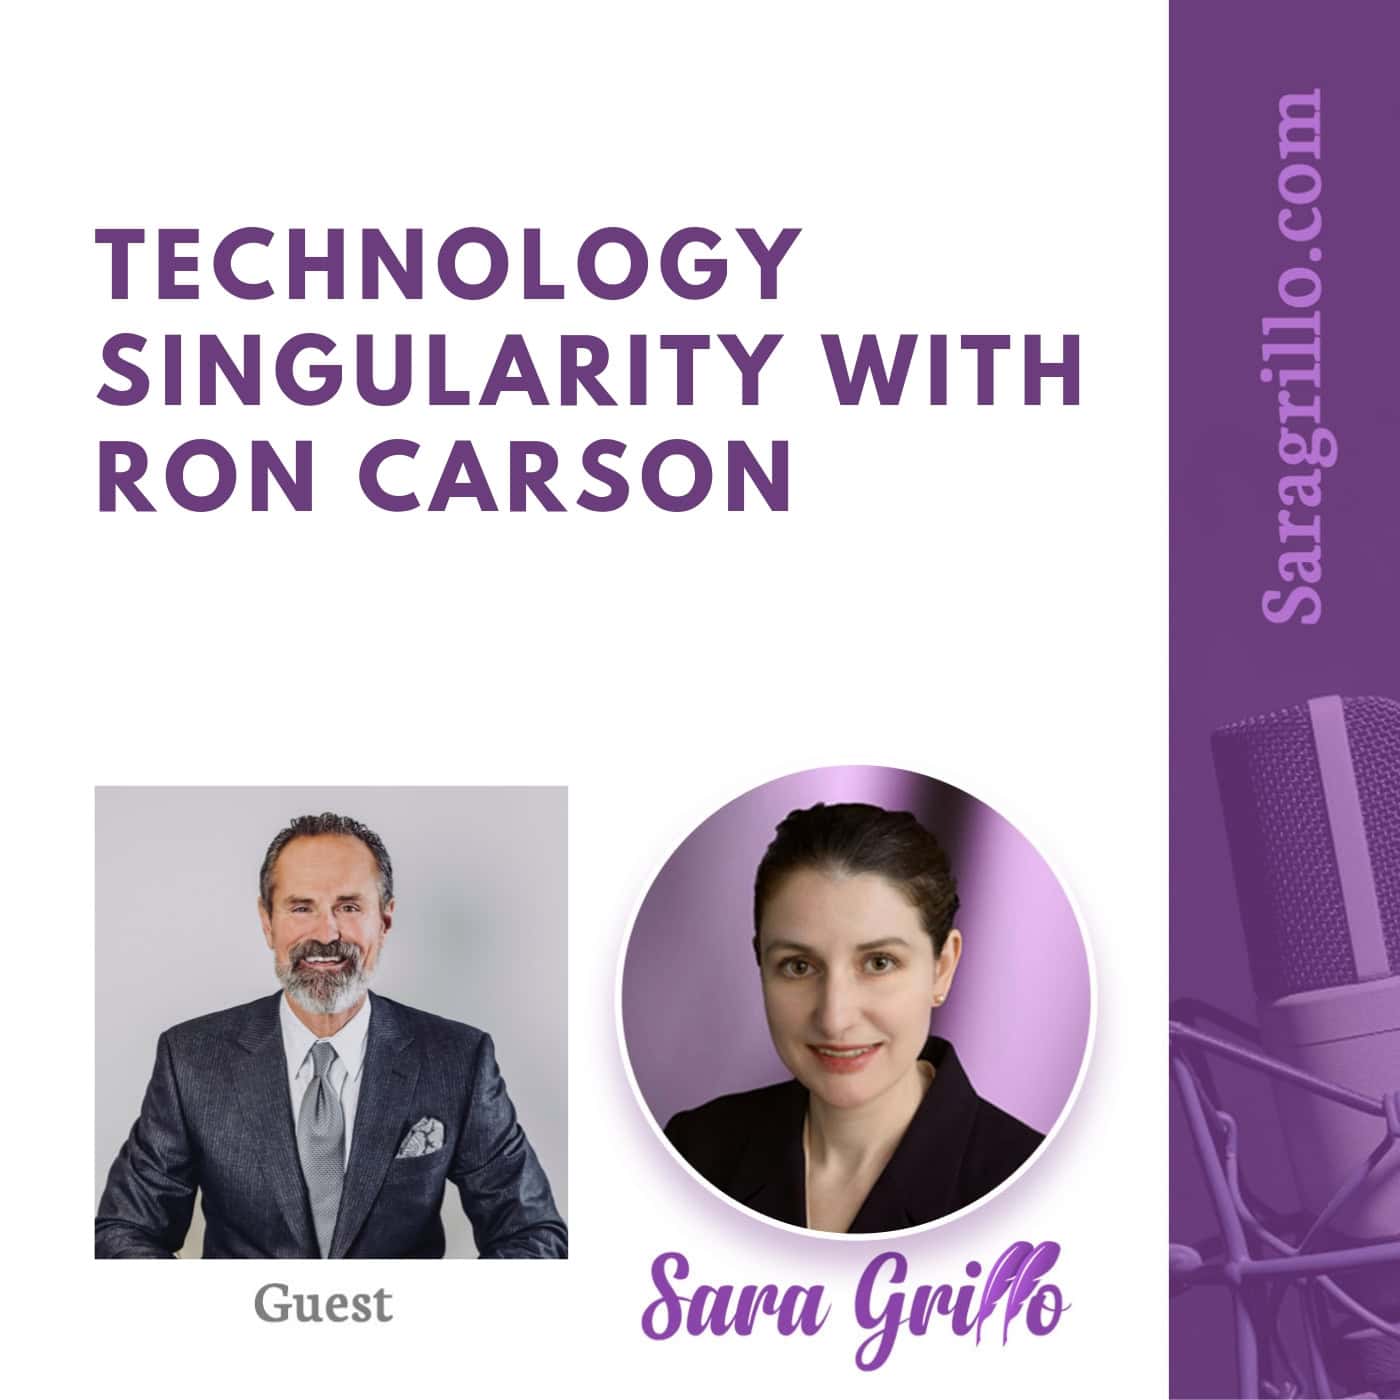 Technology Singularity with Ron Carson